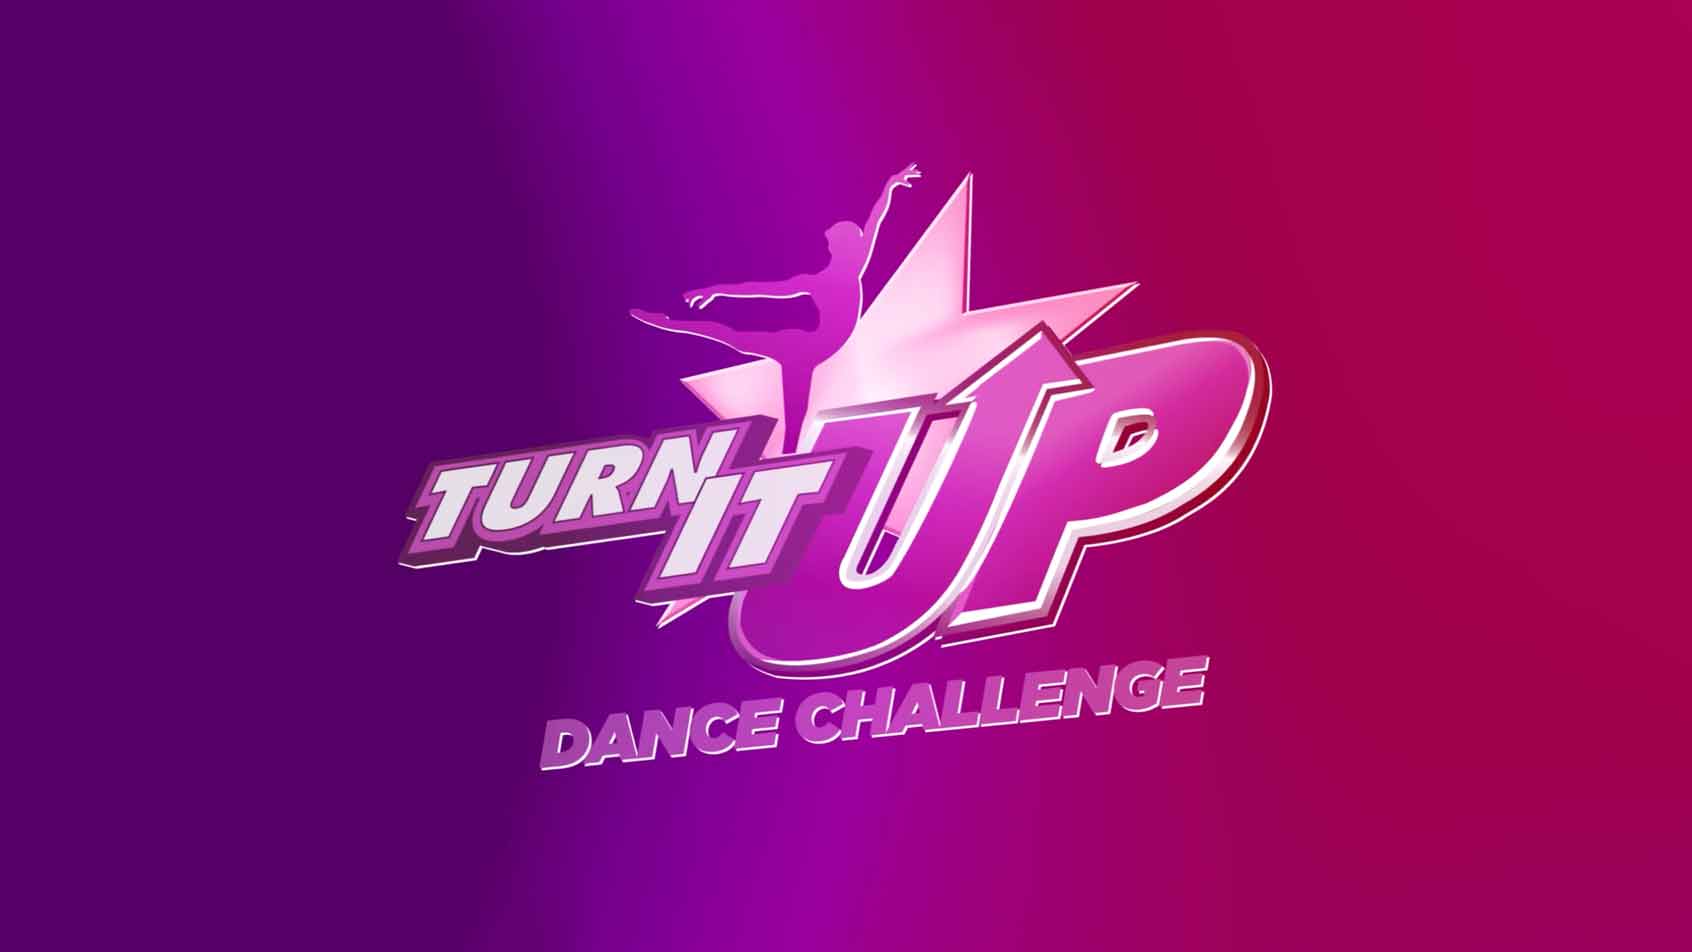 Turn Logo - Dance competitions, nationals & conventions. Turn It Up Dance Challenge